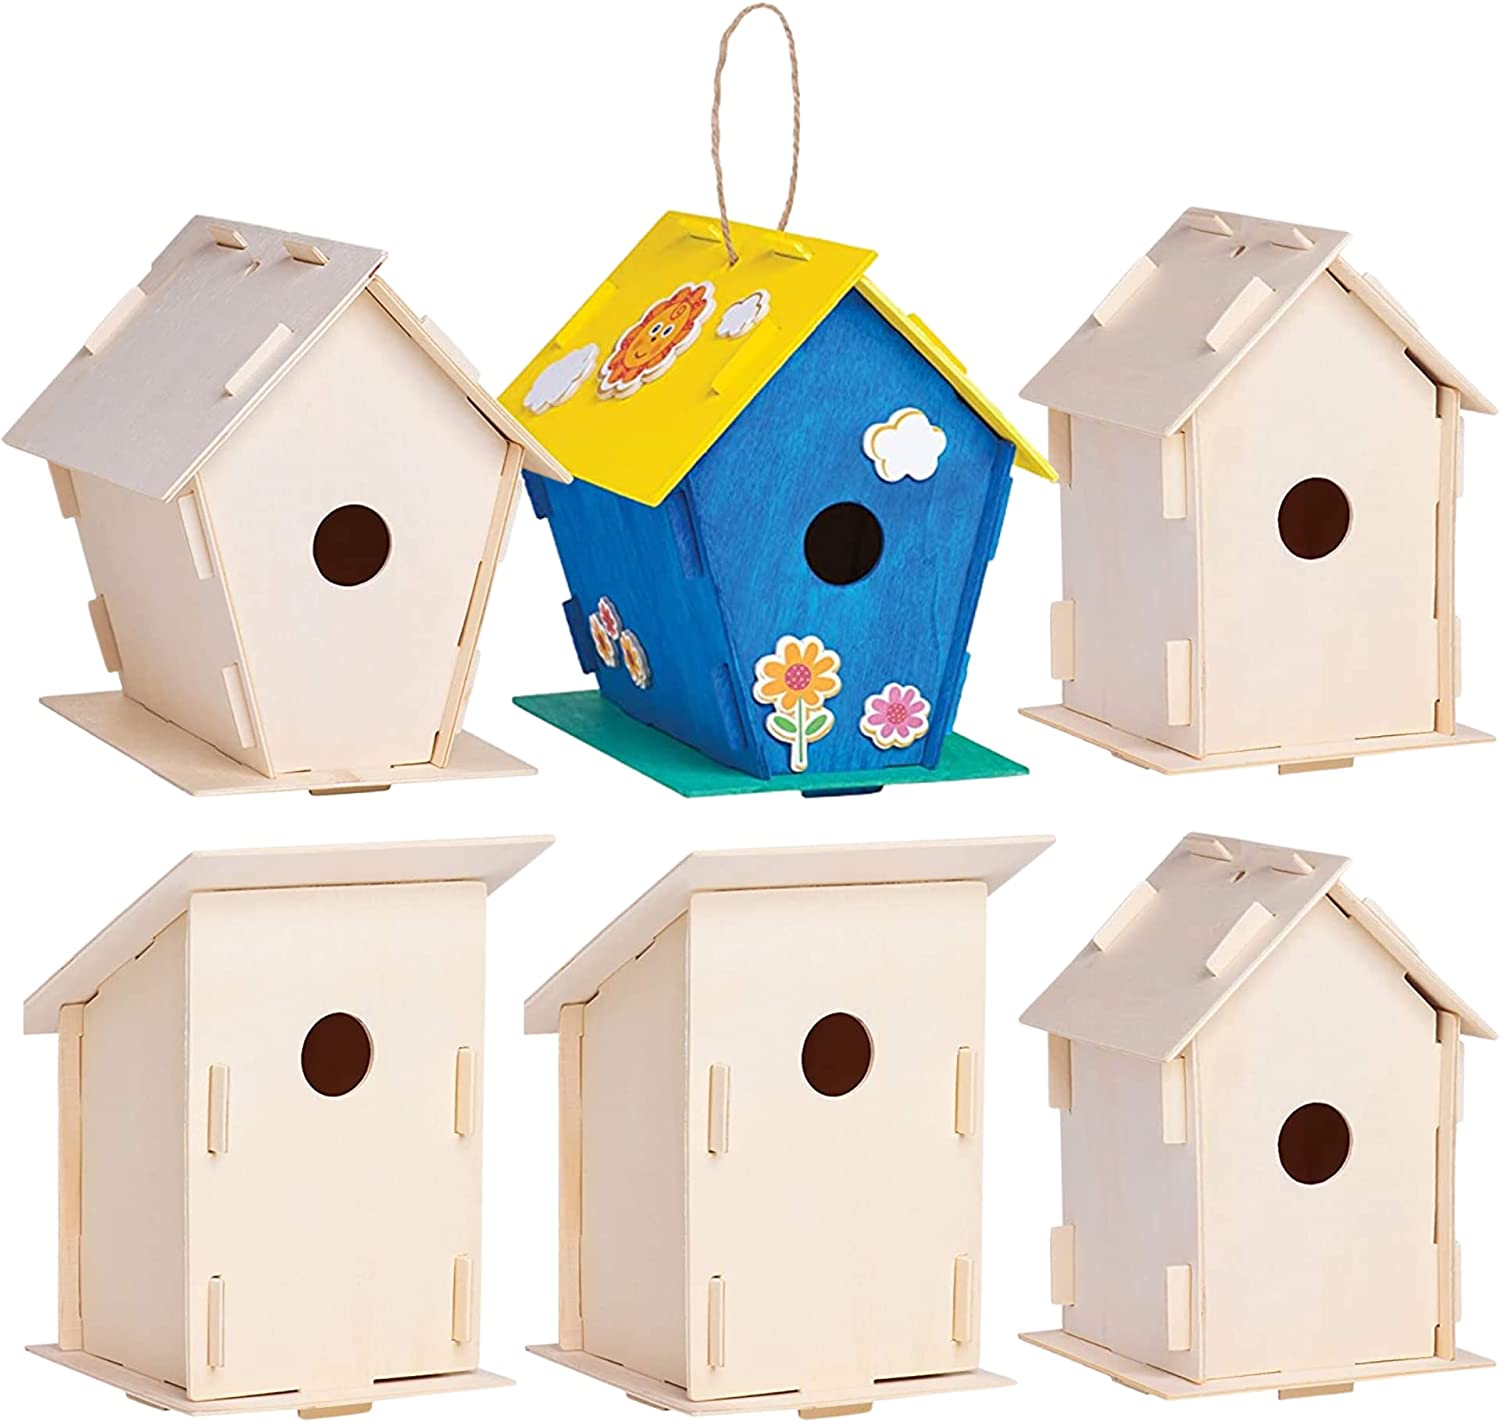 12 Wooden Birdhouses - Crafts for Girls and Boys - [...]